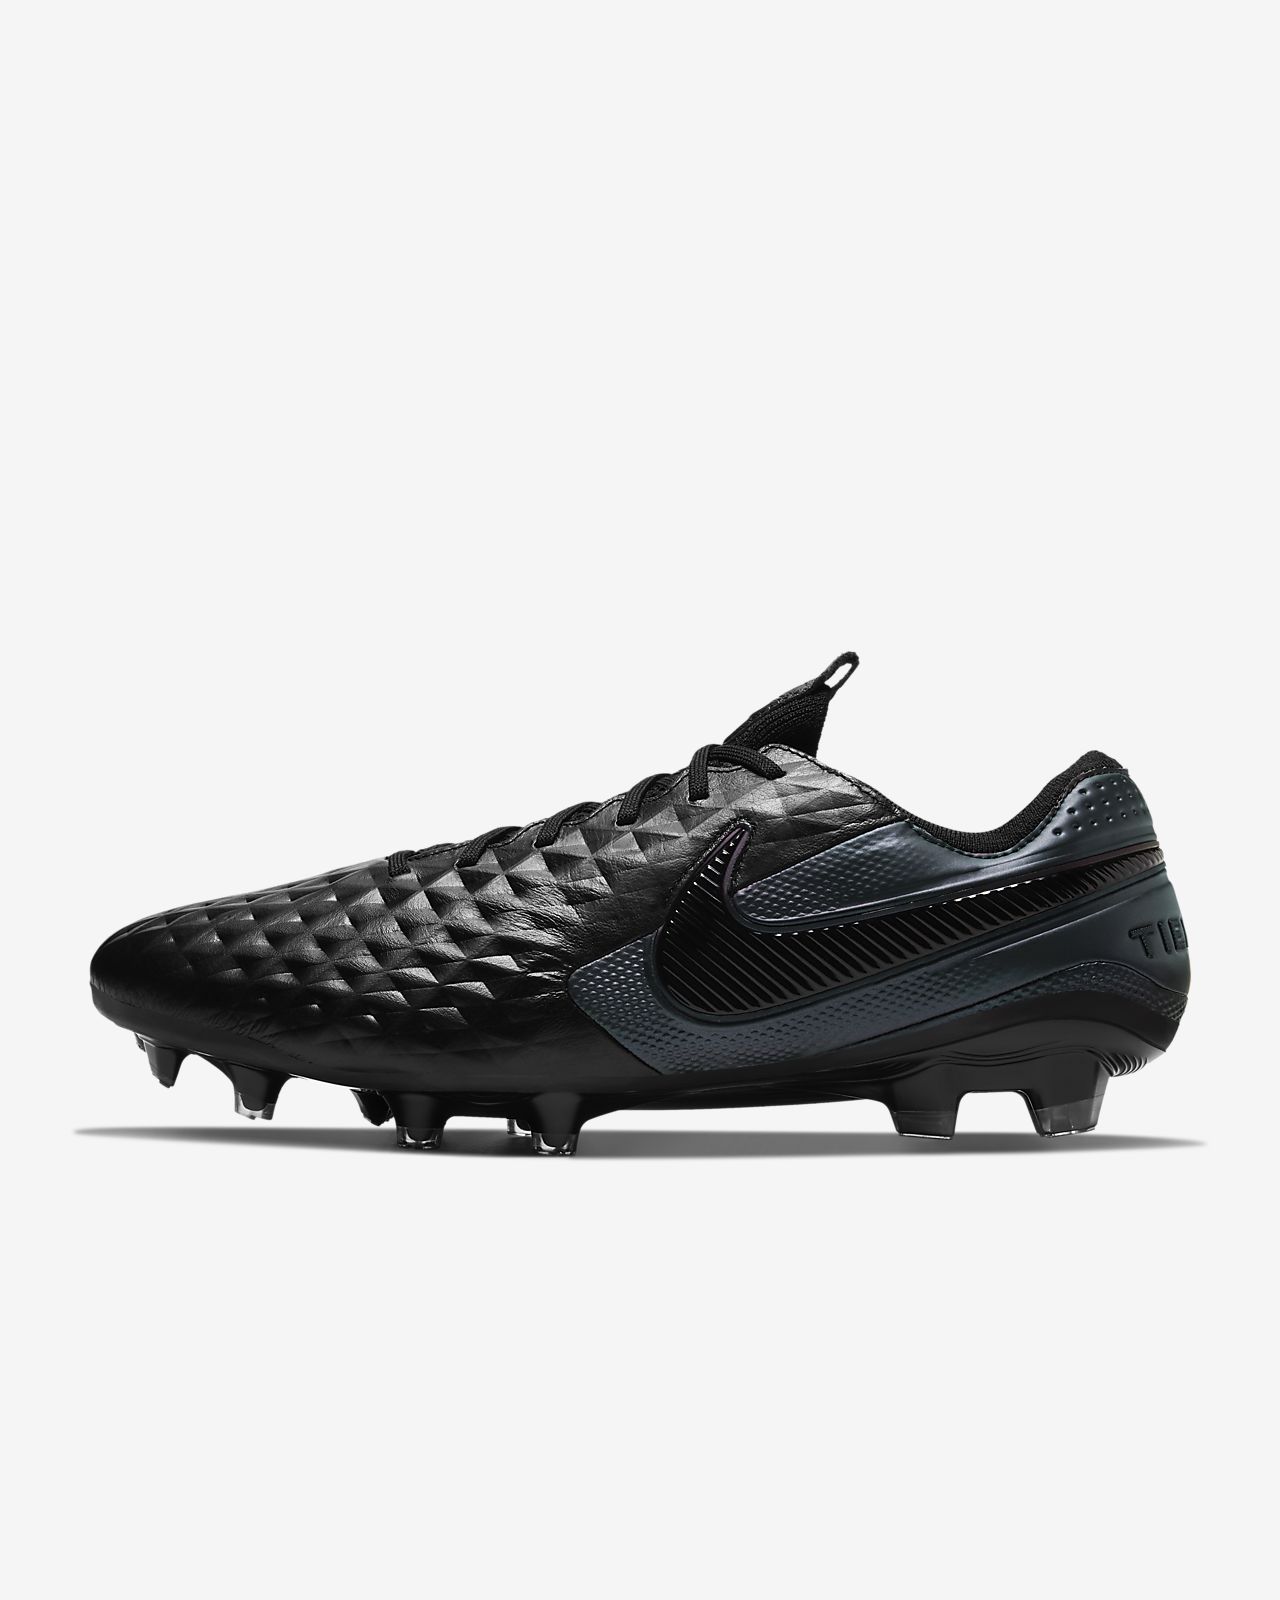 Nike Unisex Adults Time Legend 8 Academy Ic Soccer Shoe